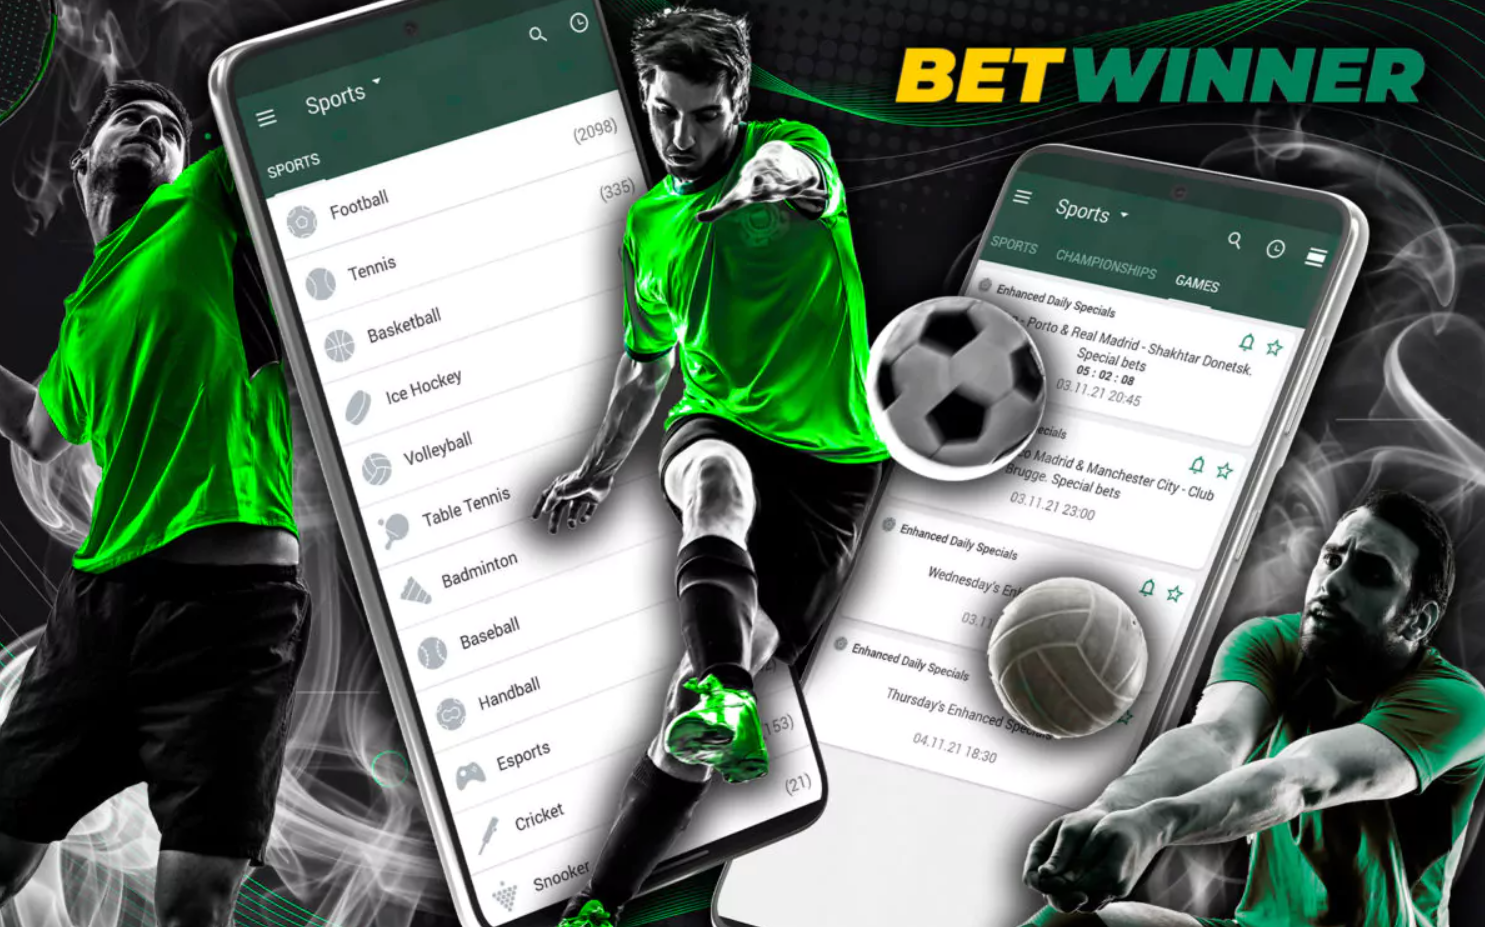 Features of the website of BetWinner company